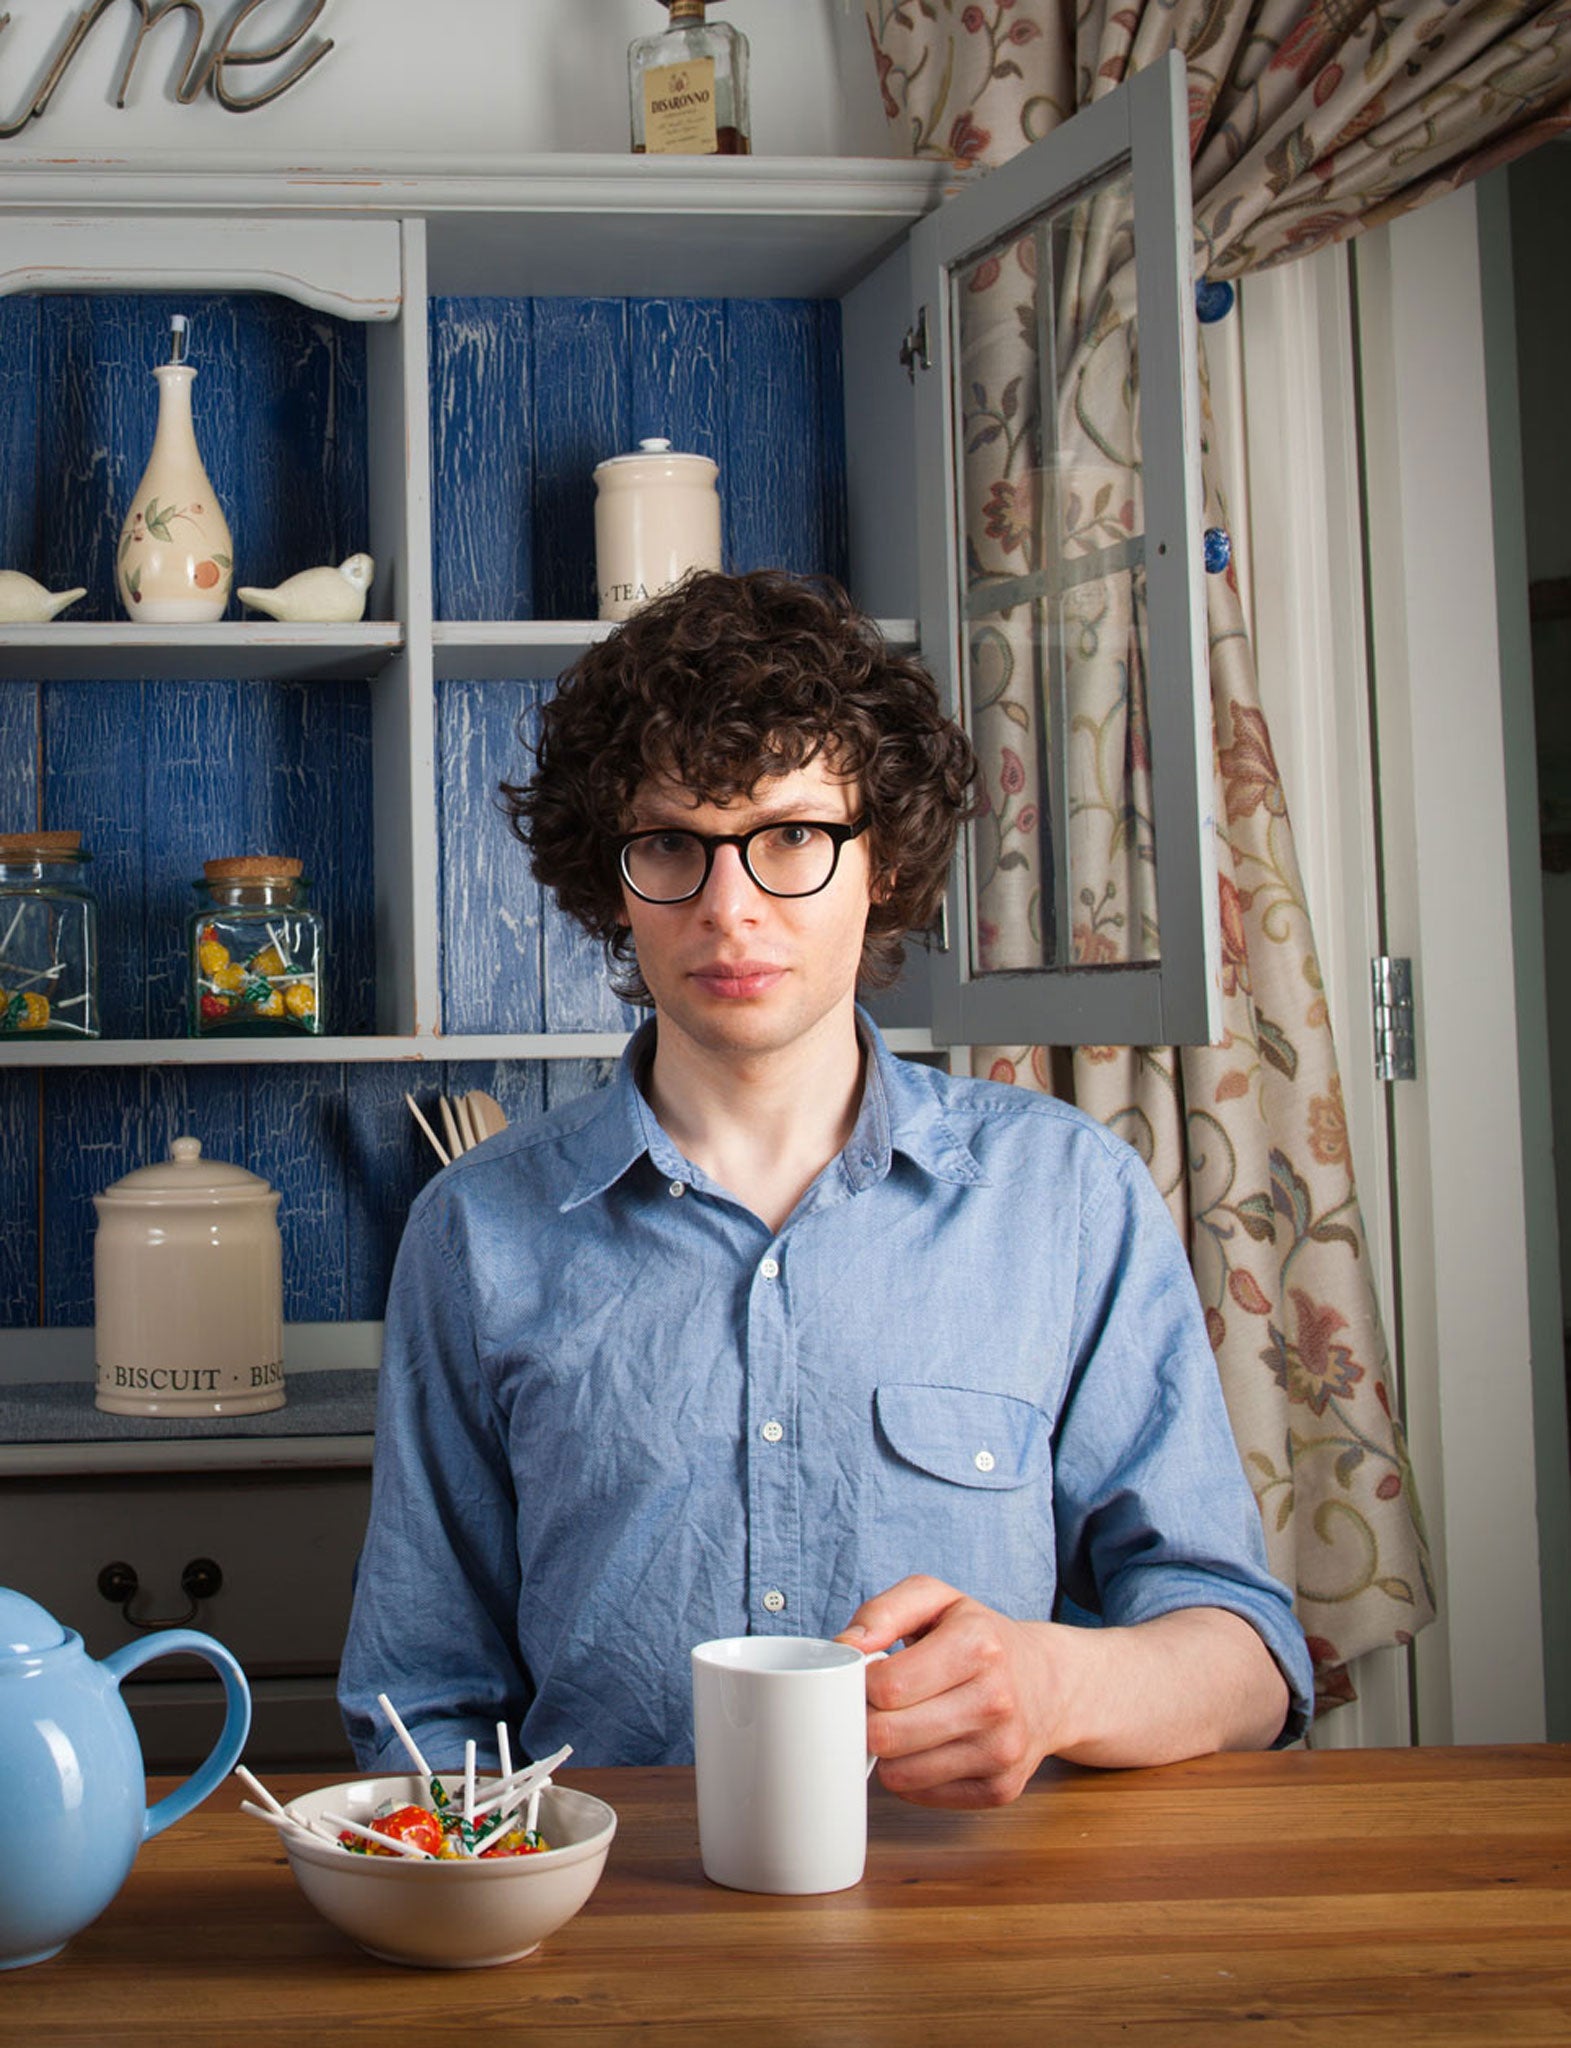 Amstell says: 'I don't think I have any regrets, it's a waste of energy because what can you do?'